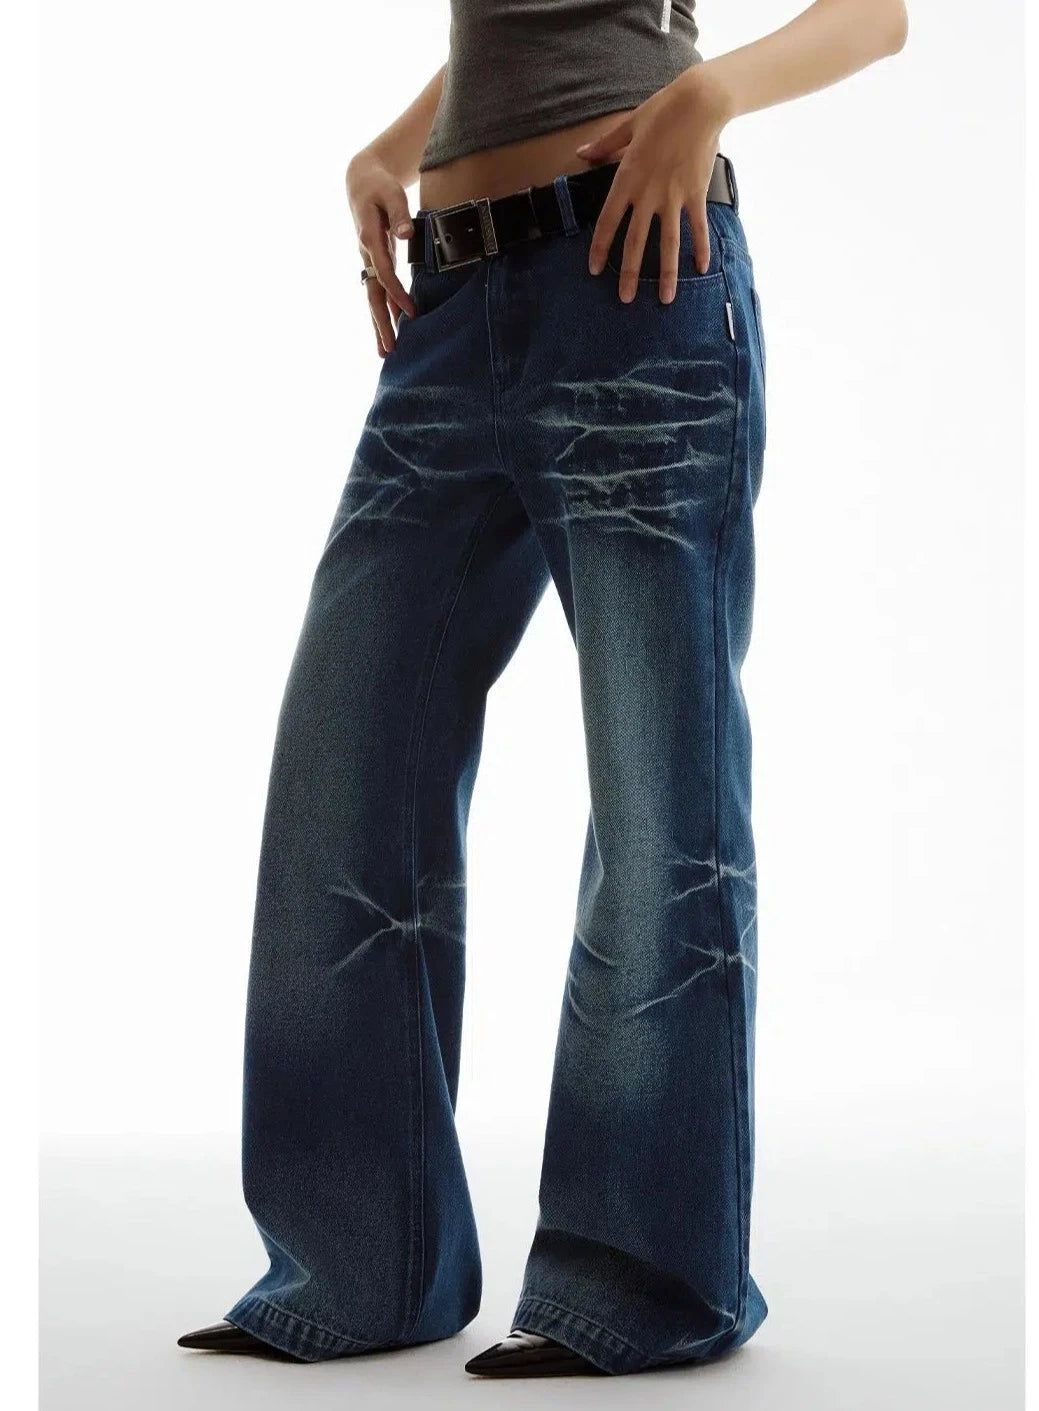 Whisker Lines Comfty Jeans Korean Street Fashion Jeans By Funky Fun Shop Online at OH Vault